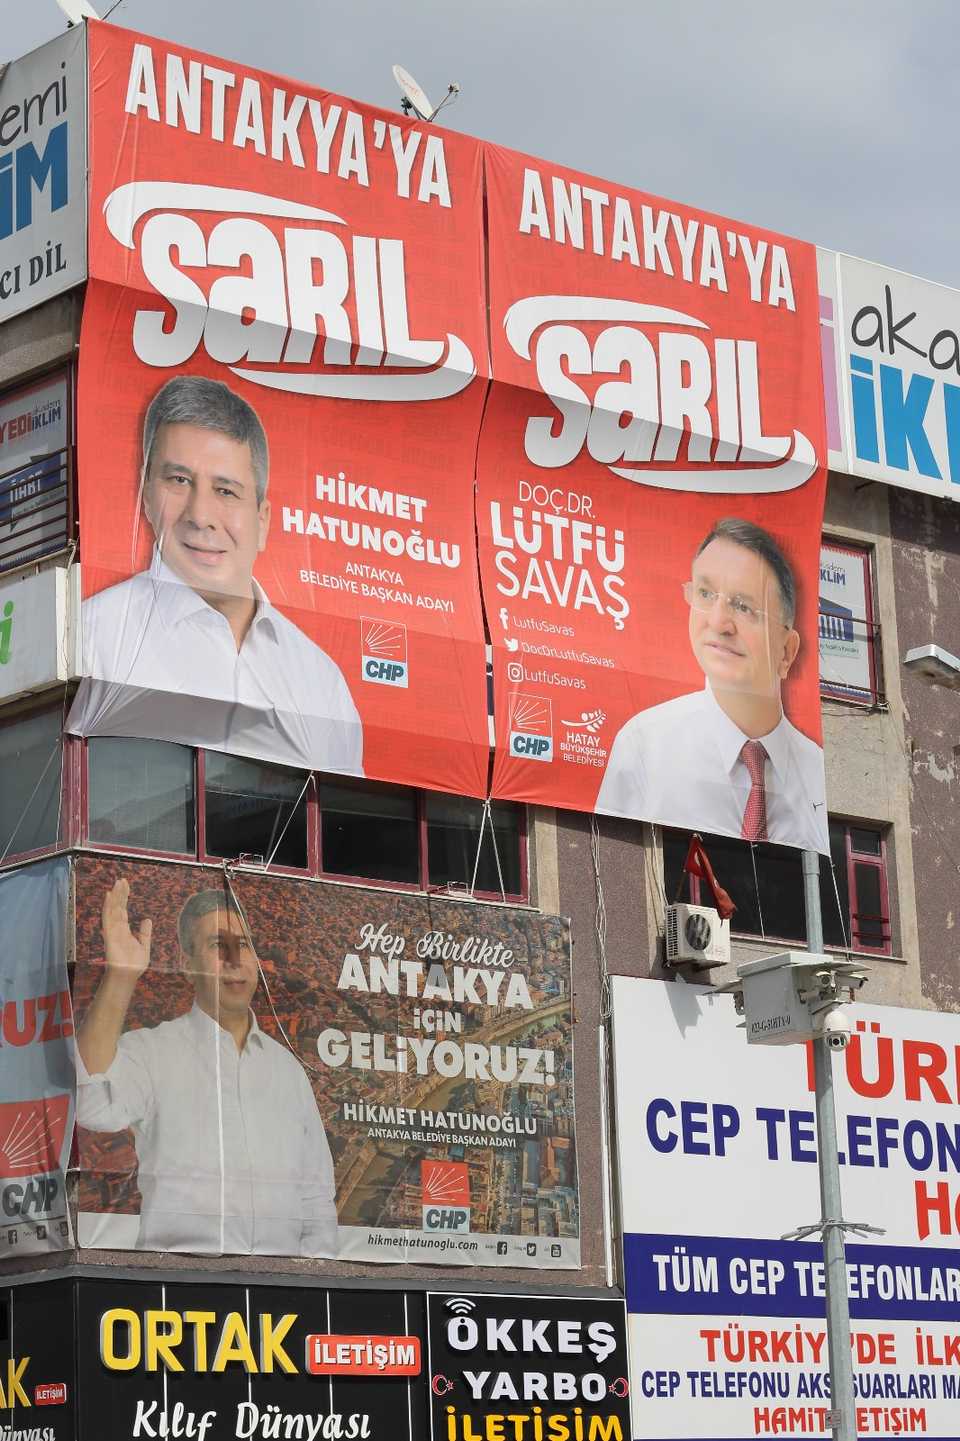 Poster of CHP candidates for Hatay and Antakya.